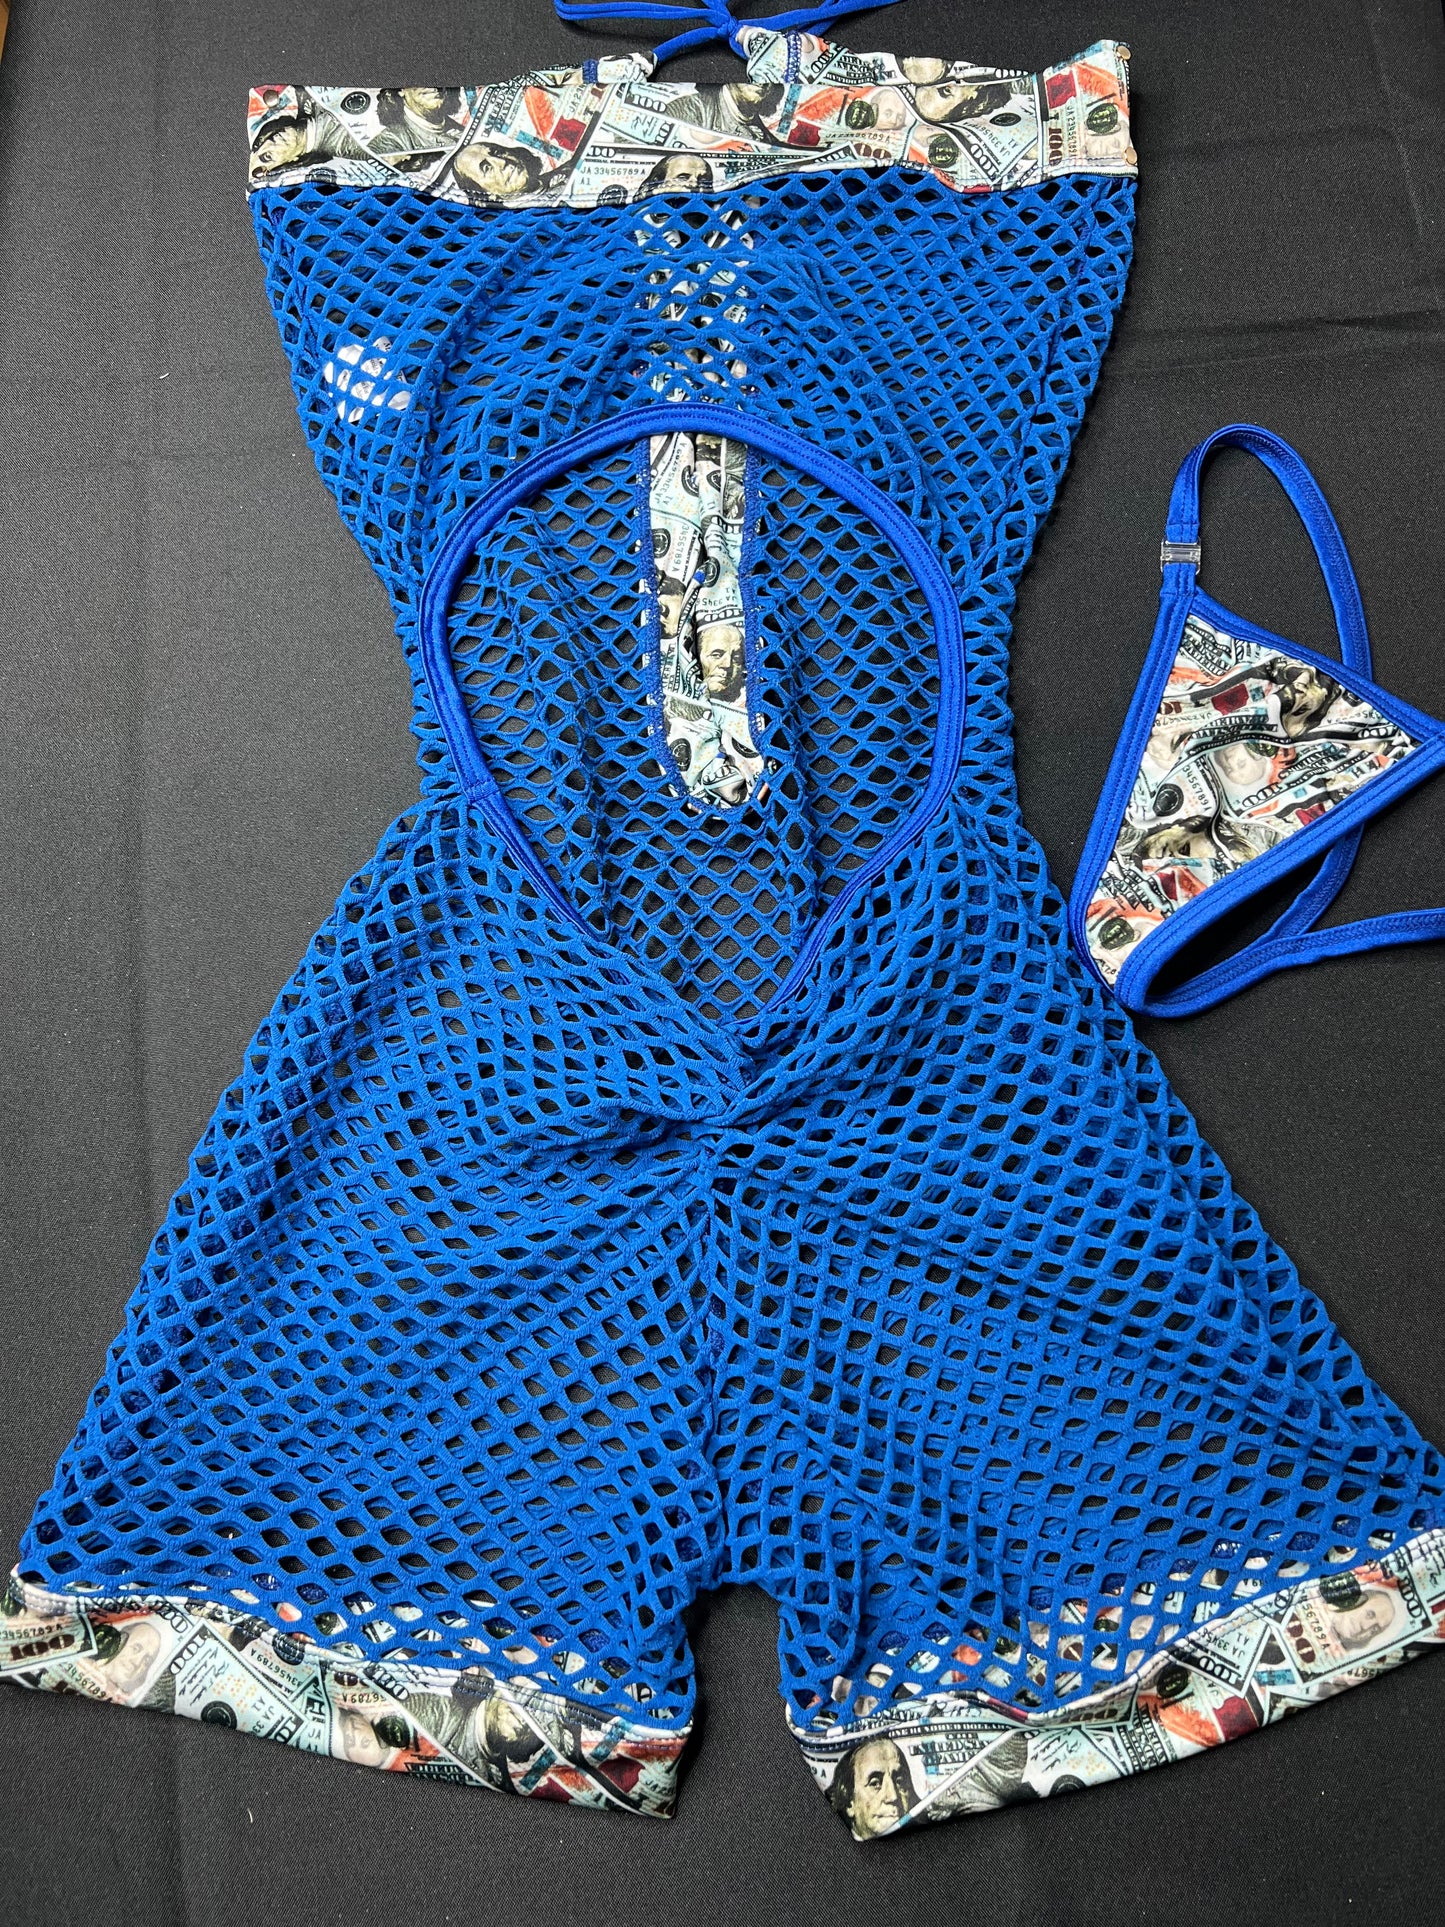 Royal Blue Fishnet/Royal Blue $100 Bill Blueface Fabric One-Piece Exotic Dancer Outfit